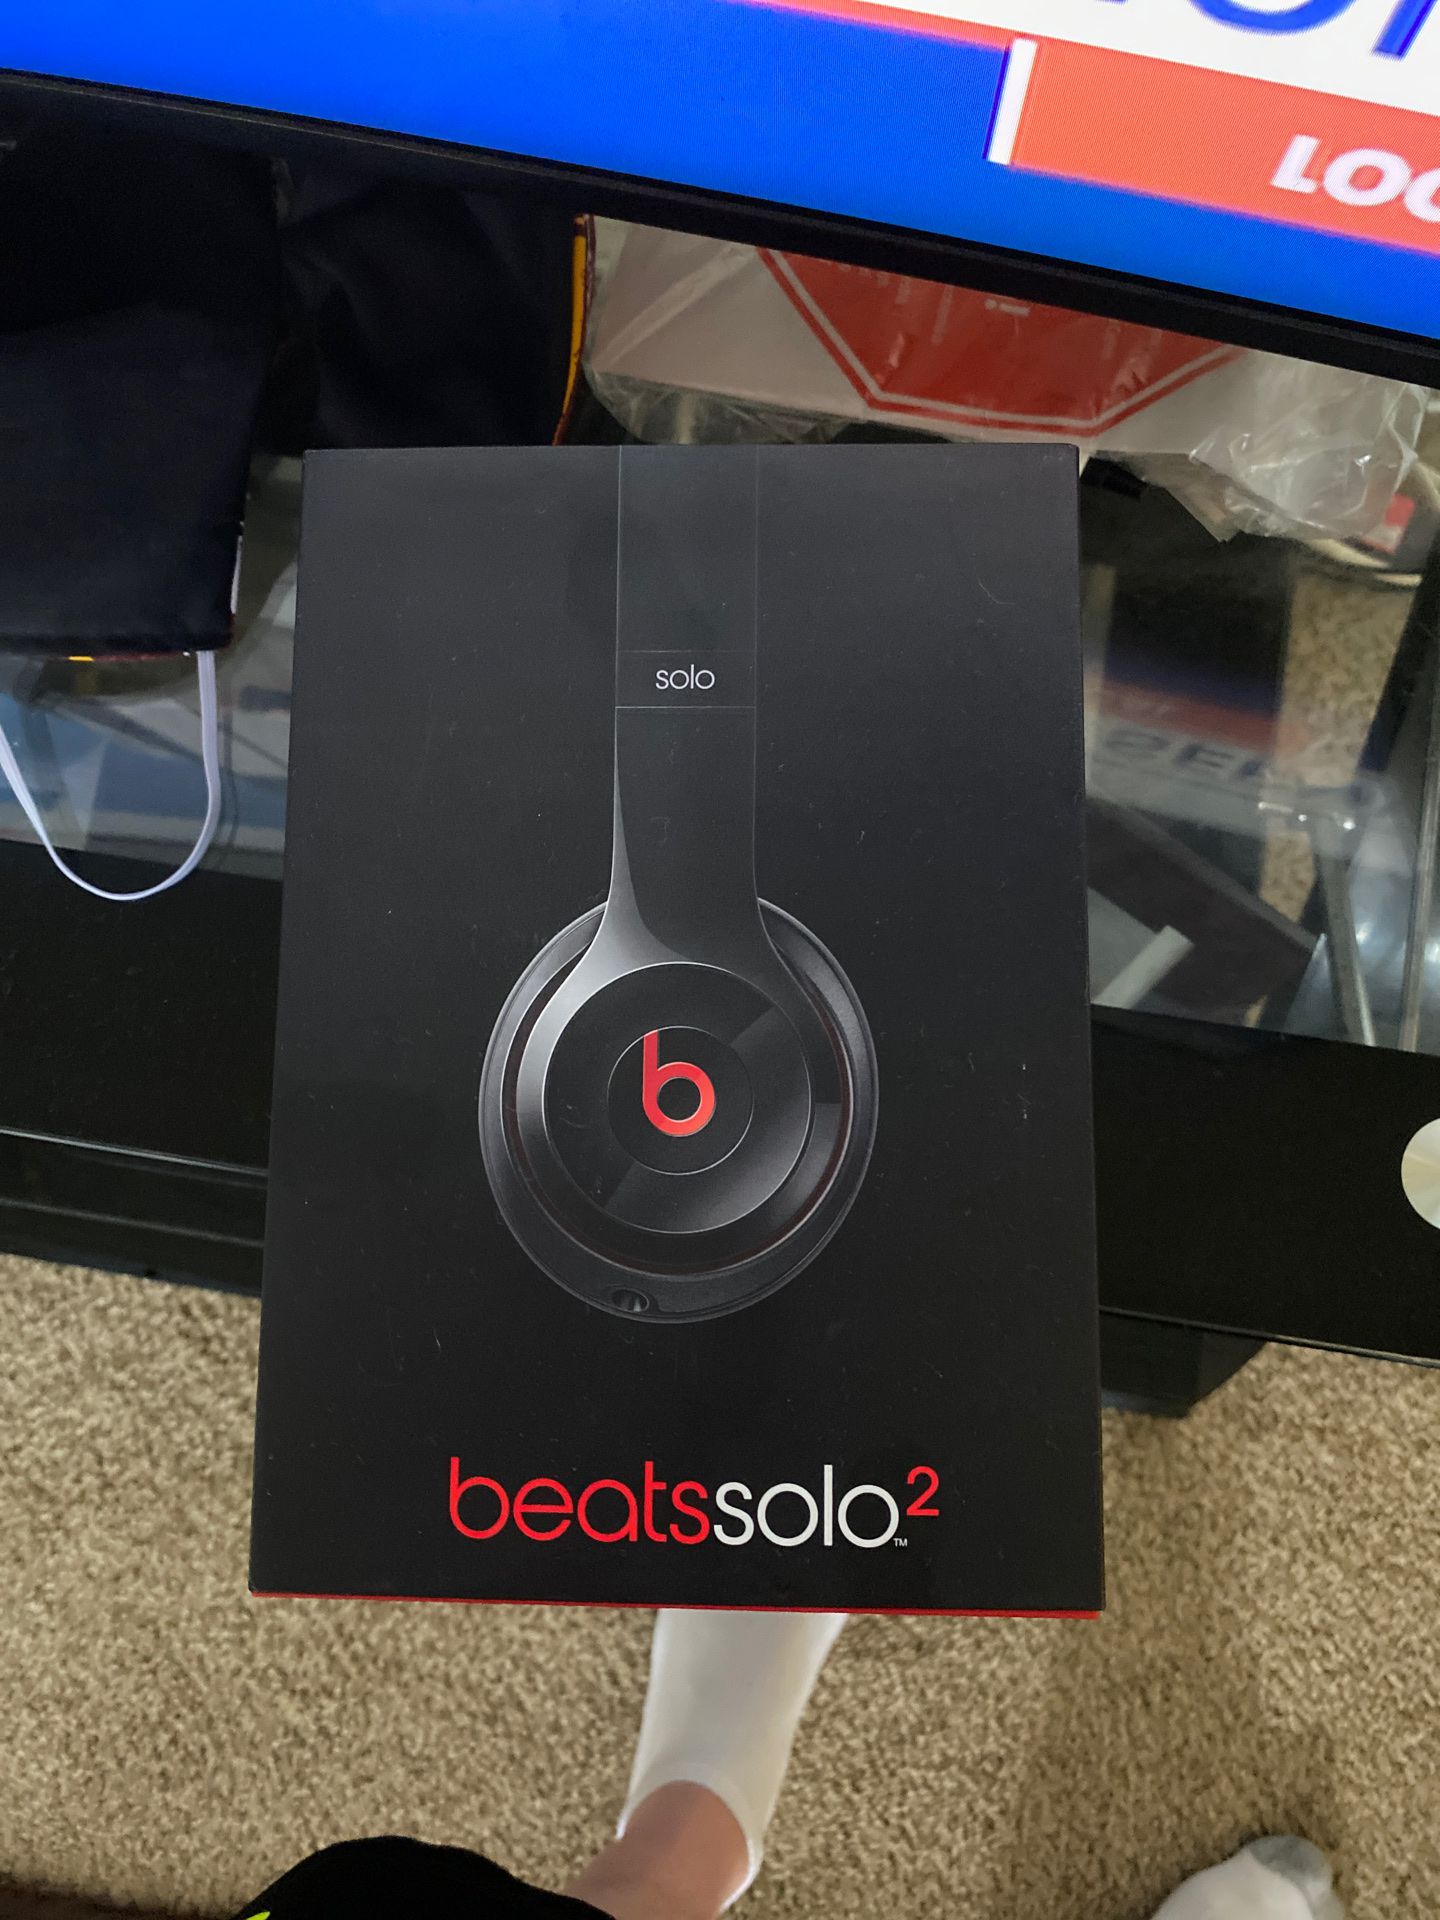 Brand new beats solo2 for AirPods trade or buy